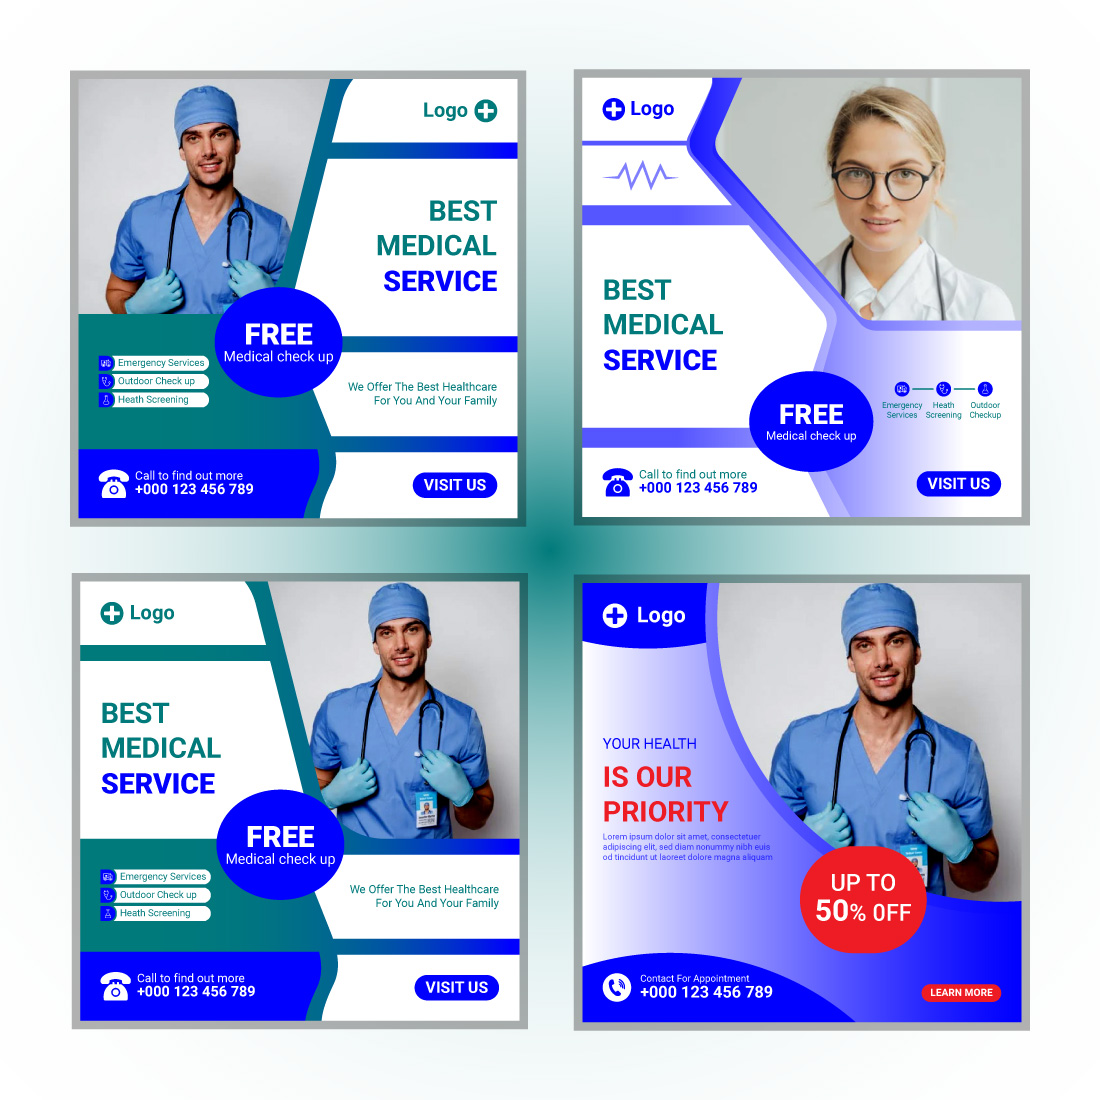 Medical and Healthcare Social Media Posts Design cover image.